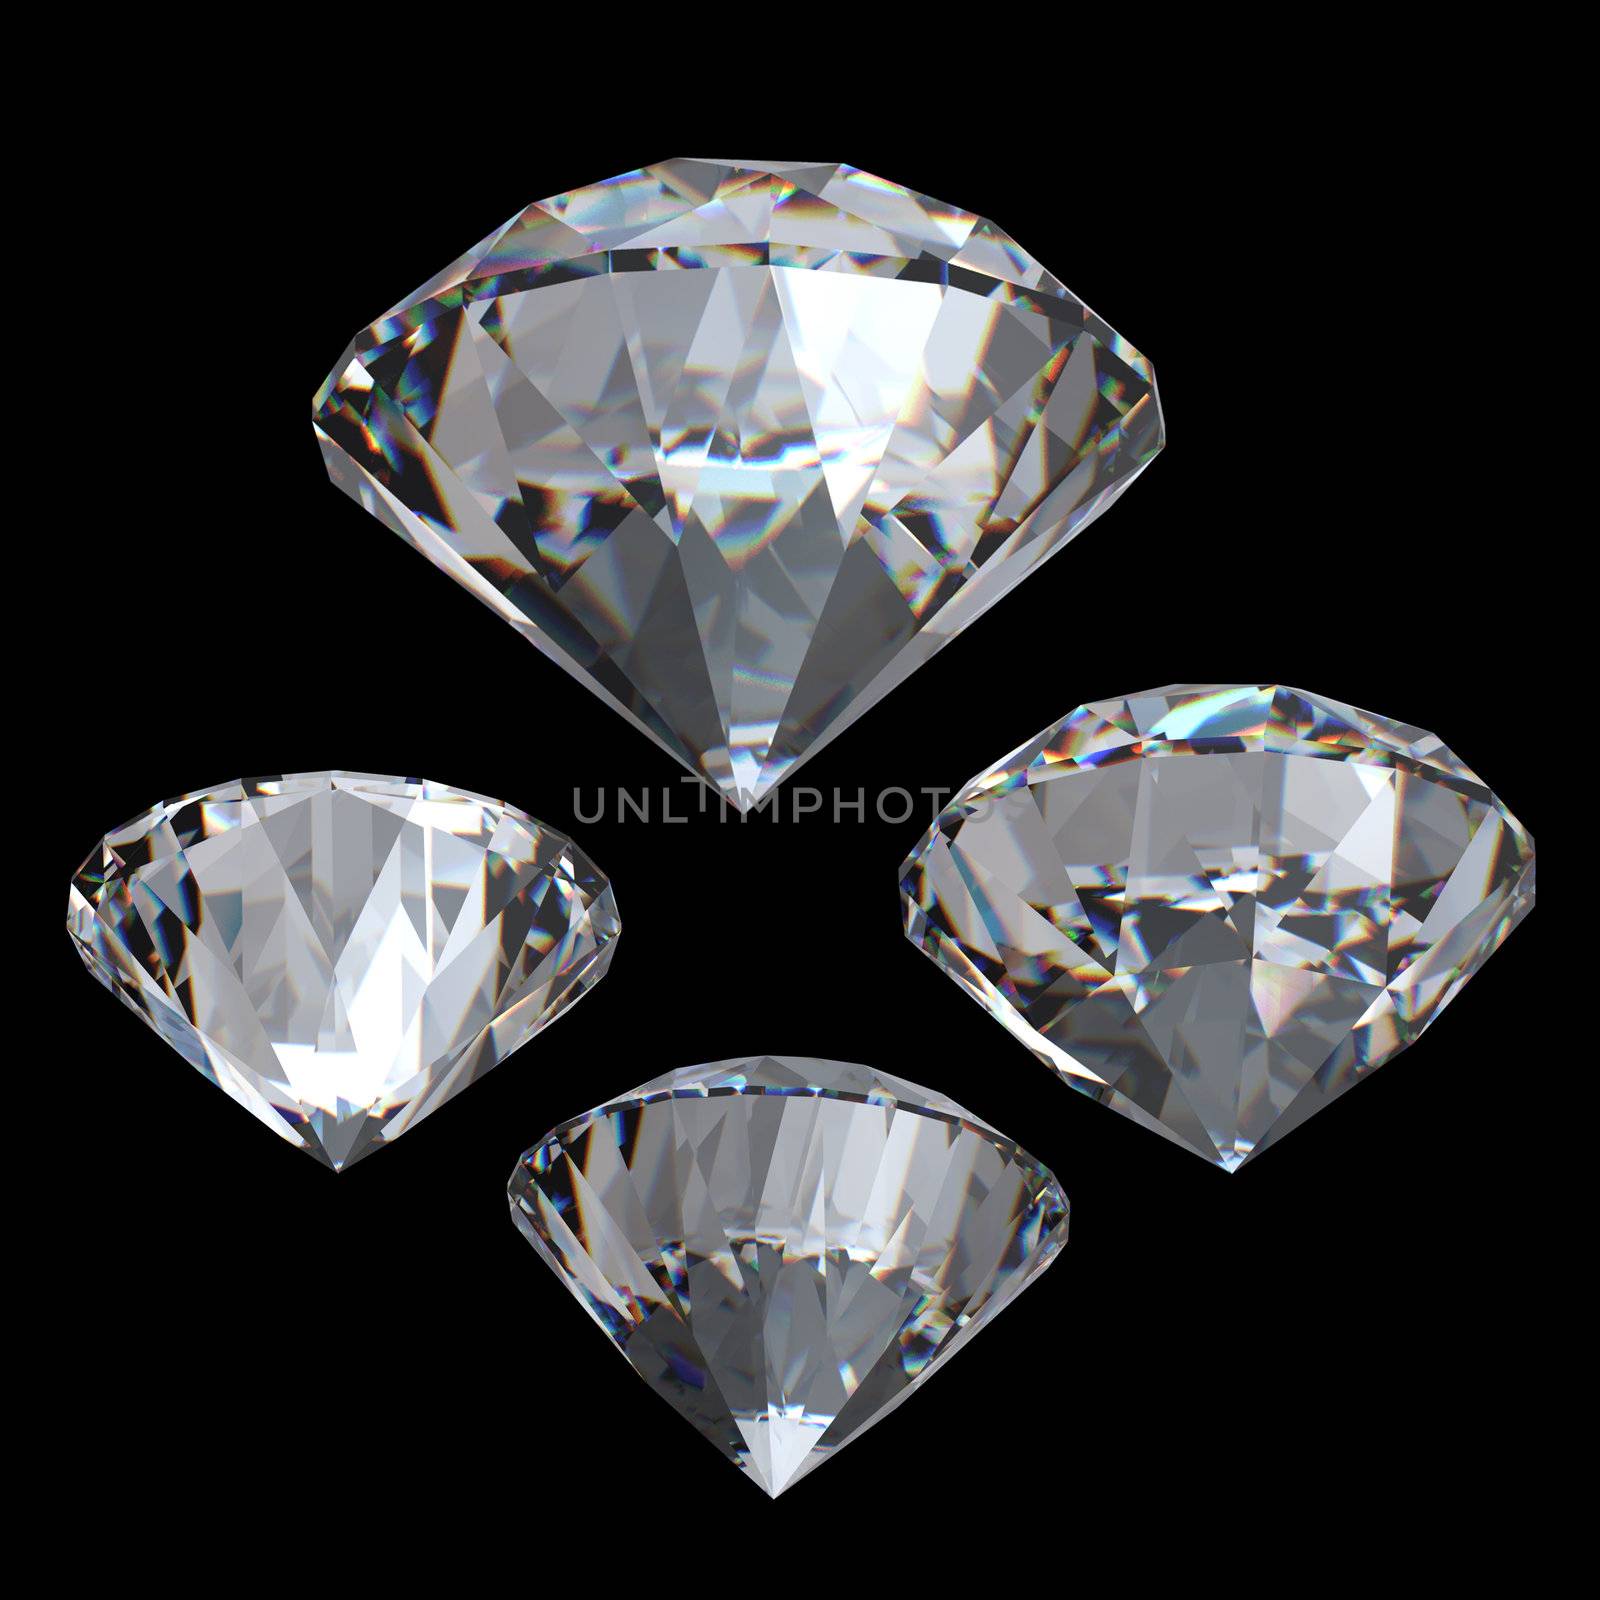 Round brilliant cut diamond perspective isolated on black background